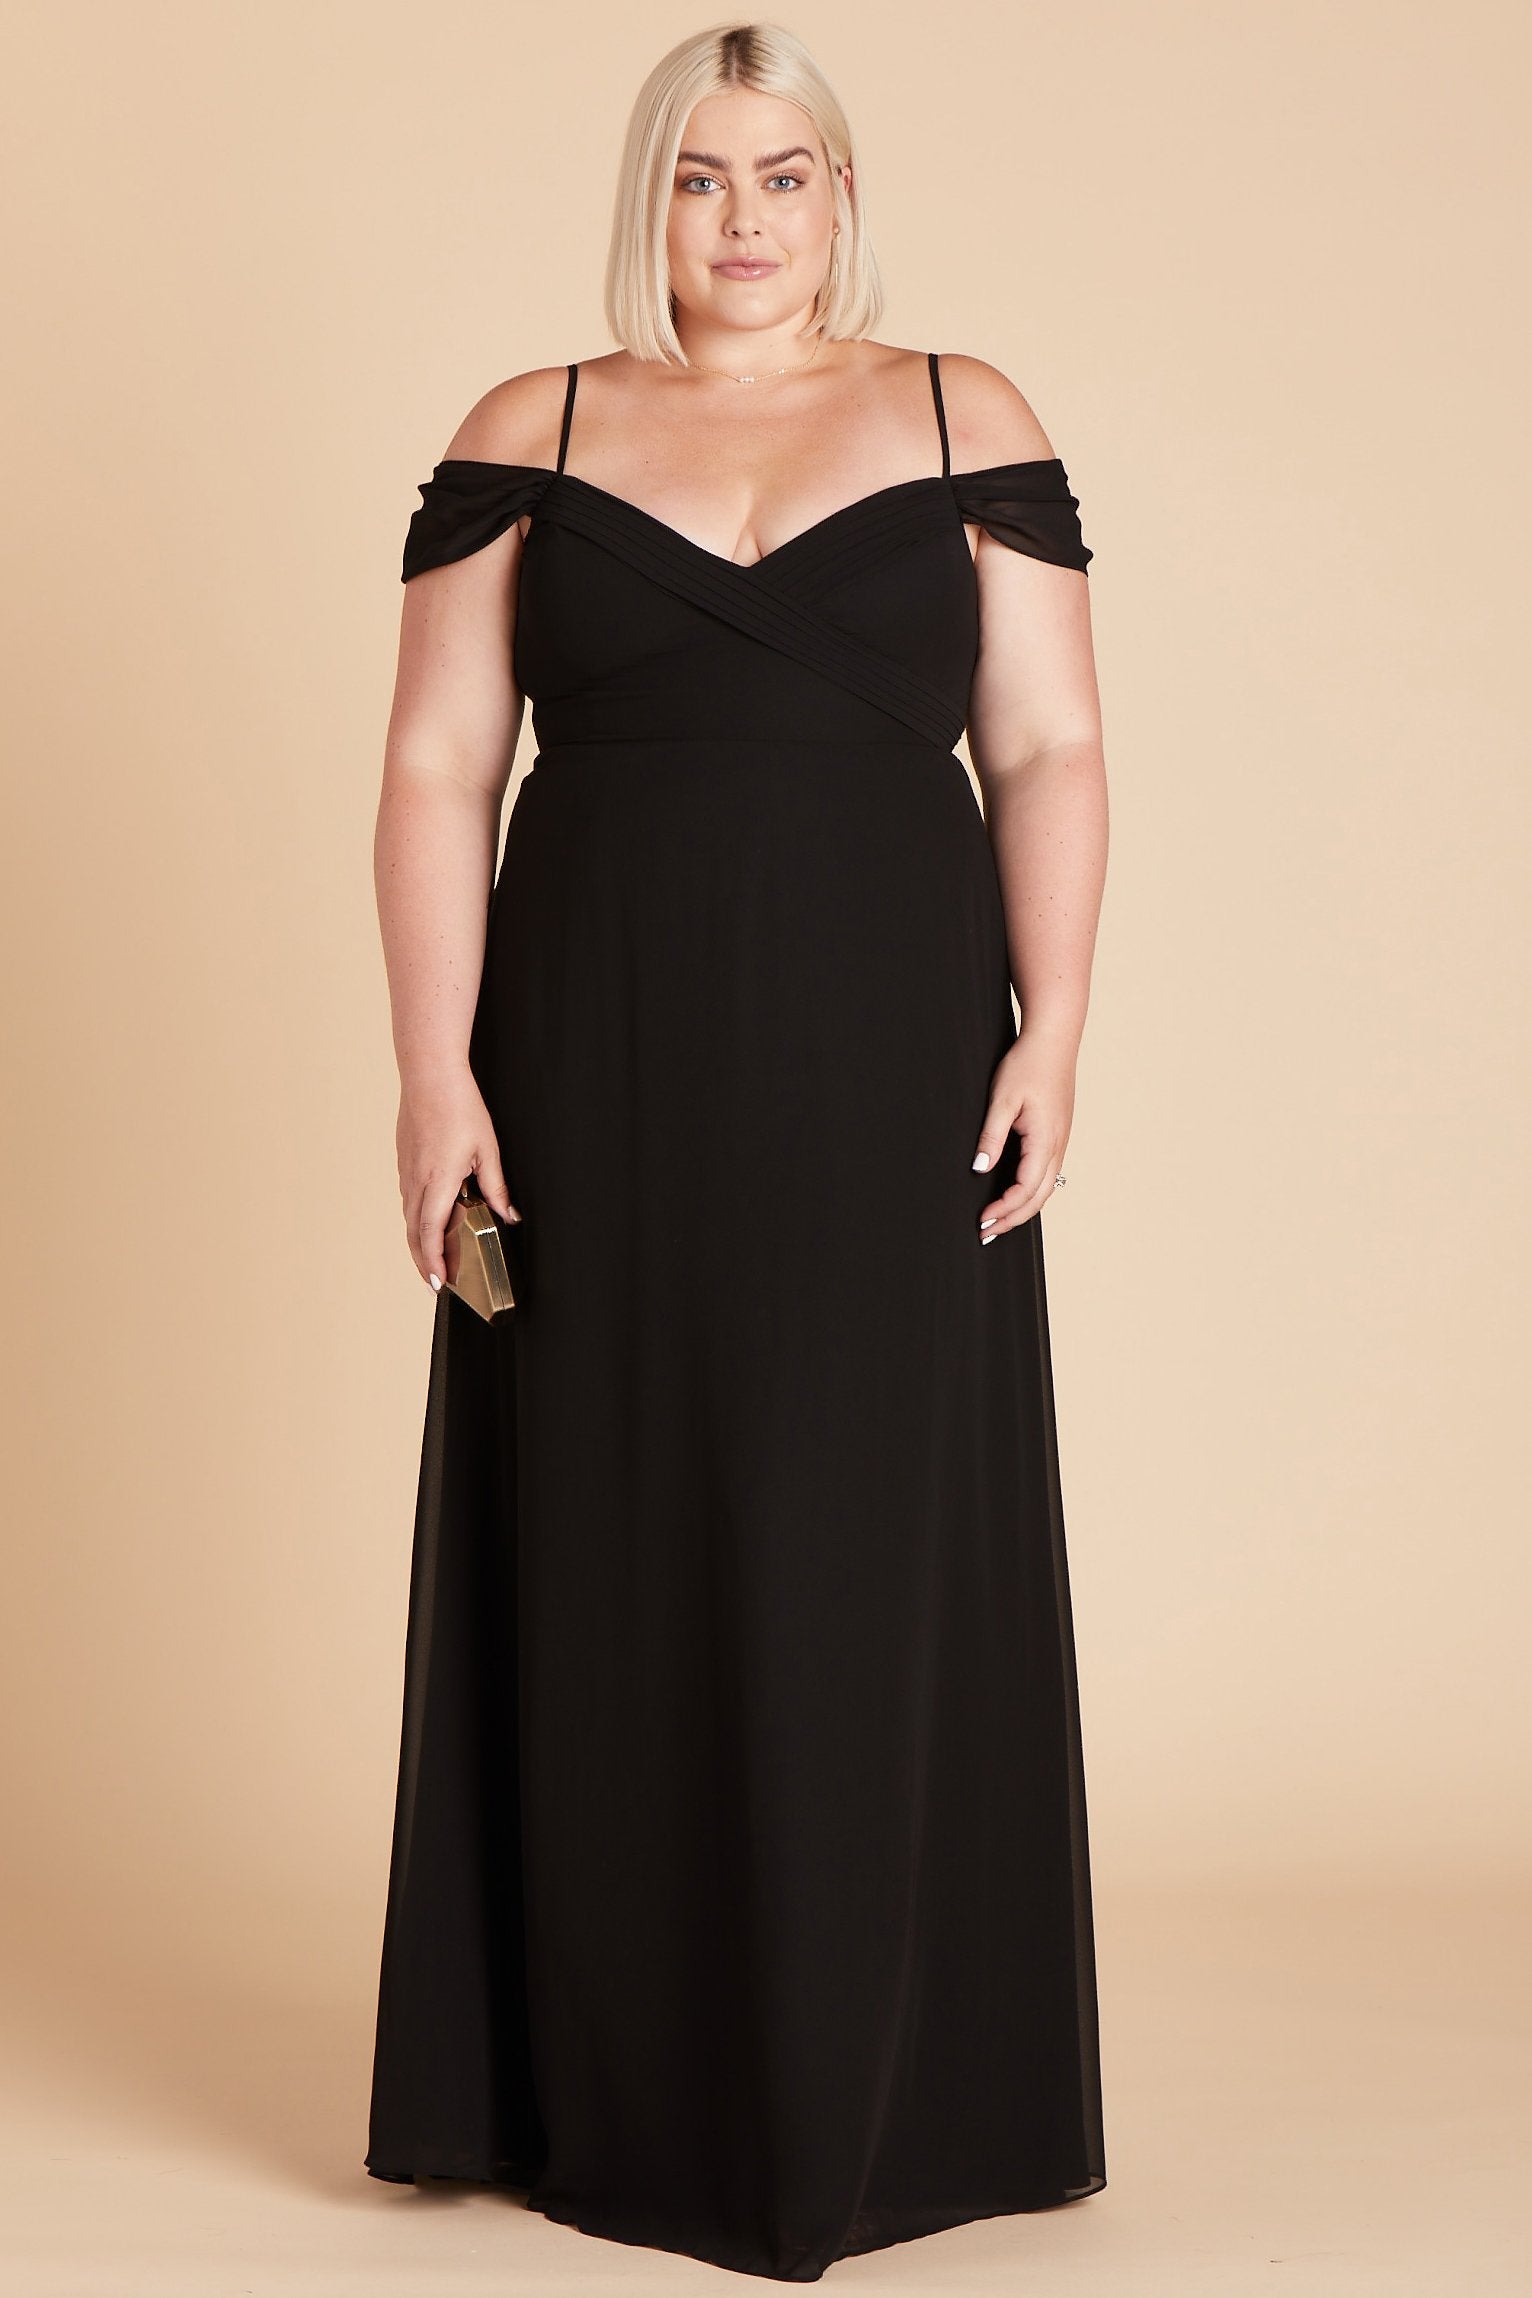 Spence convertible plus size bridesmaid dress in black chiffon by Birdy Grey, front view